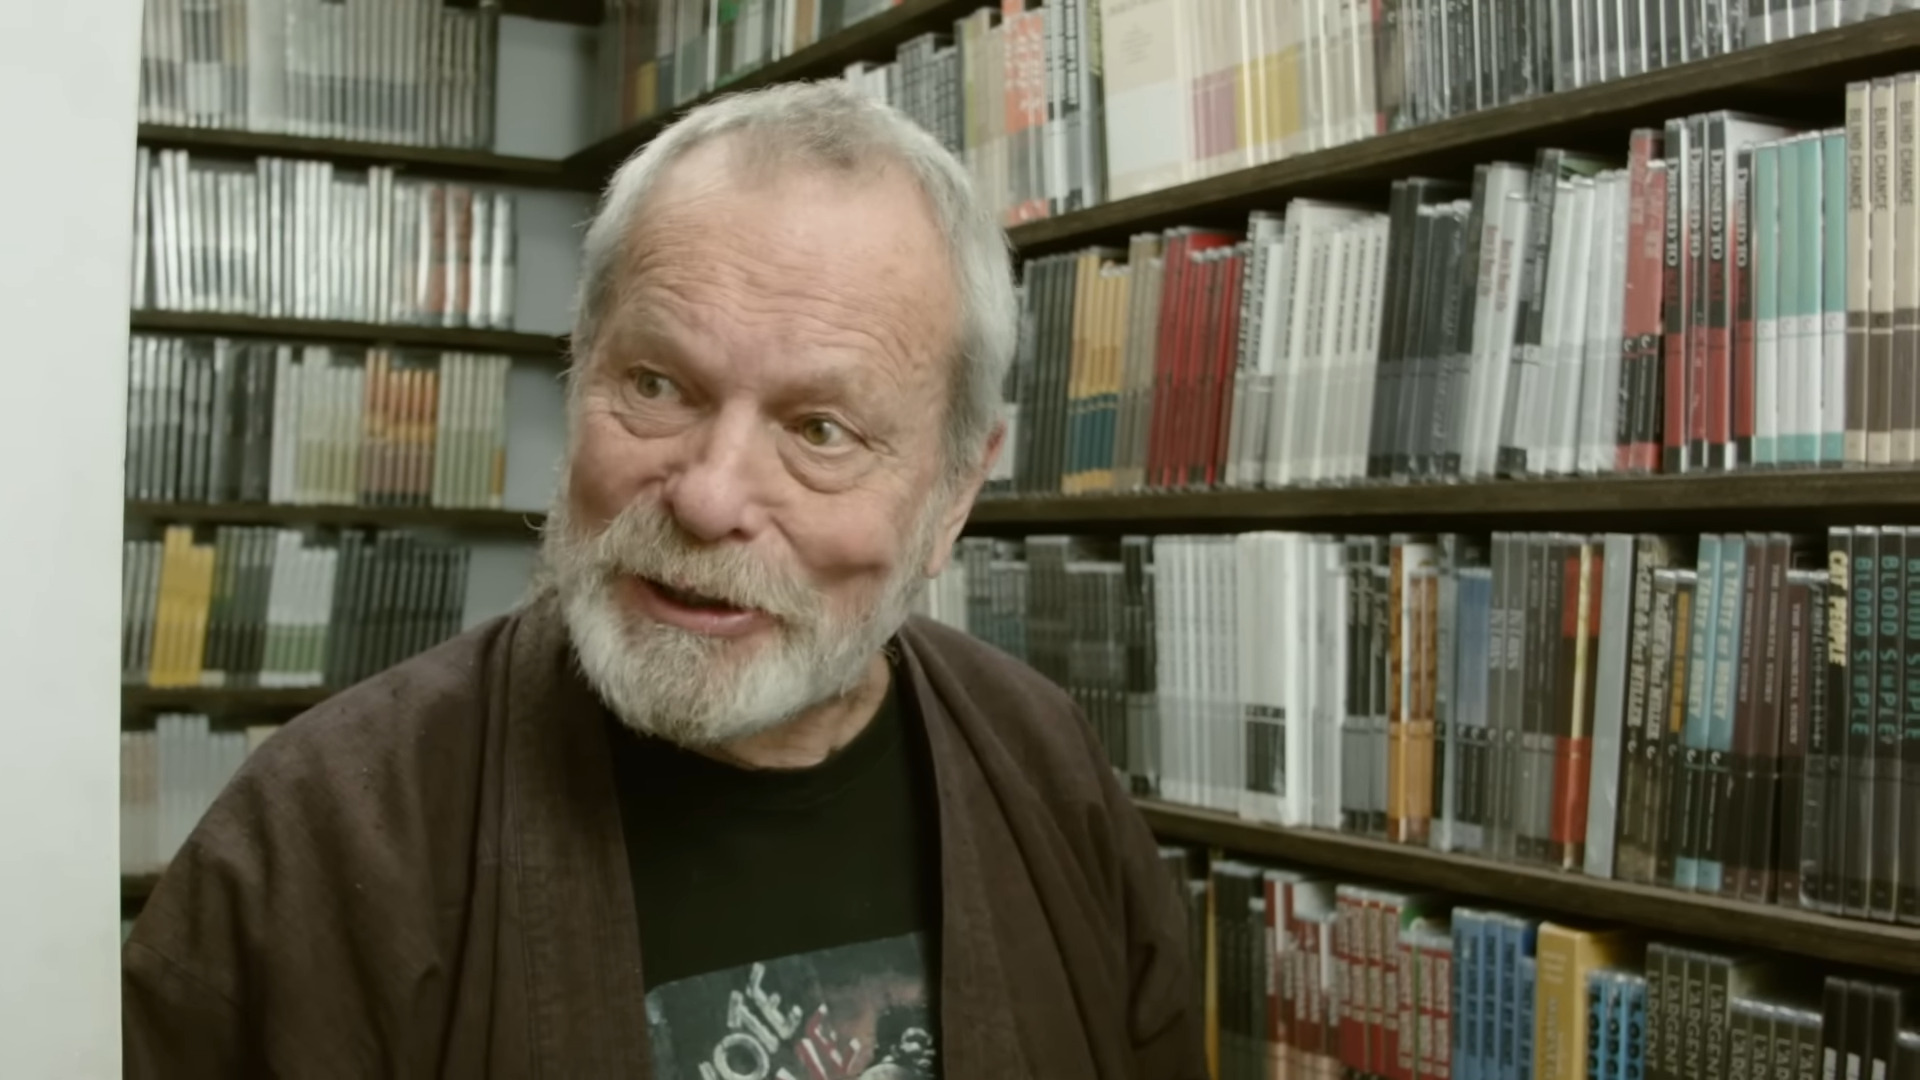 Terry Gilliam shares some of his Criterion Collection favorites via Criterion Collection's Closet Picks